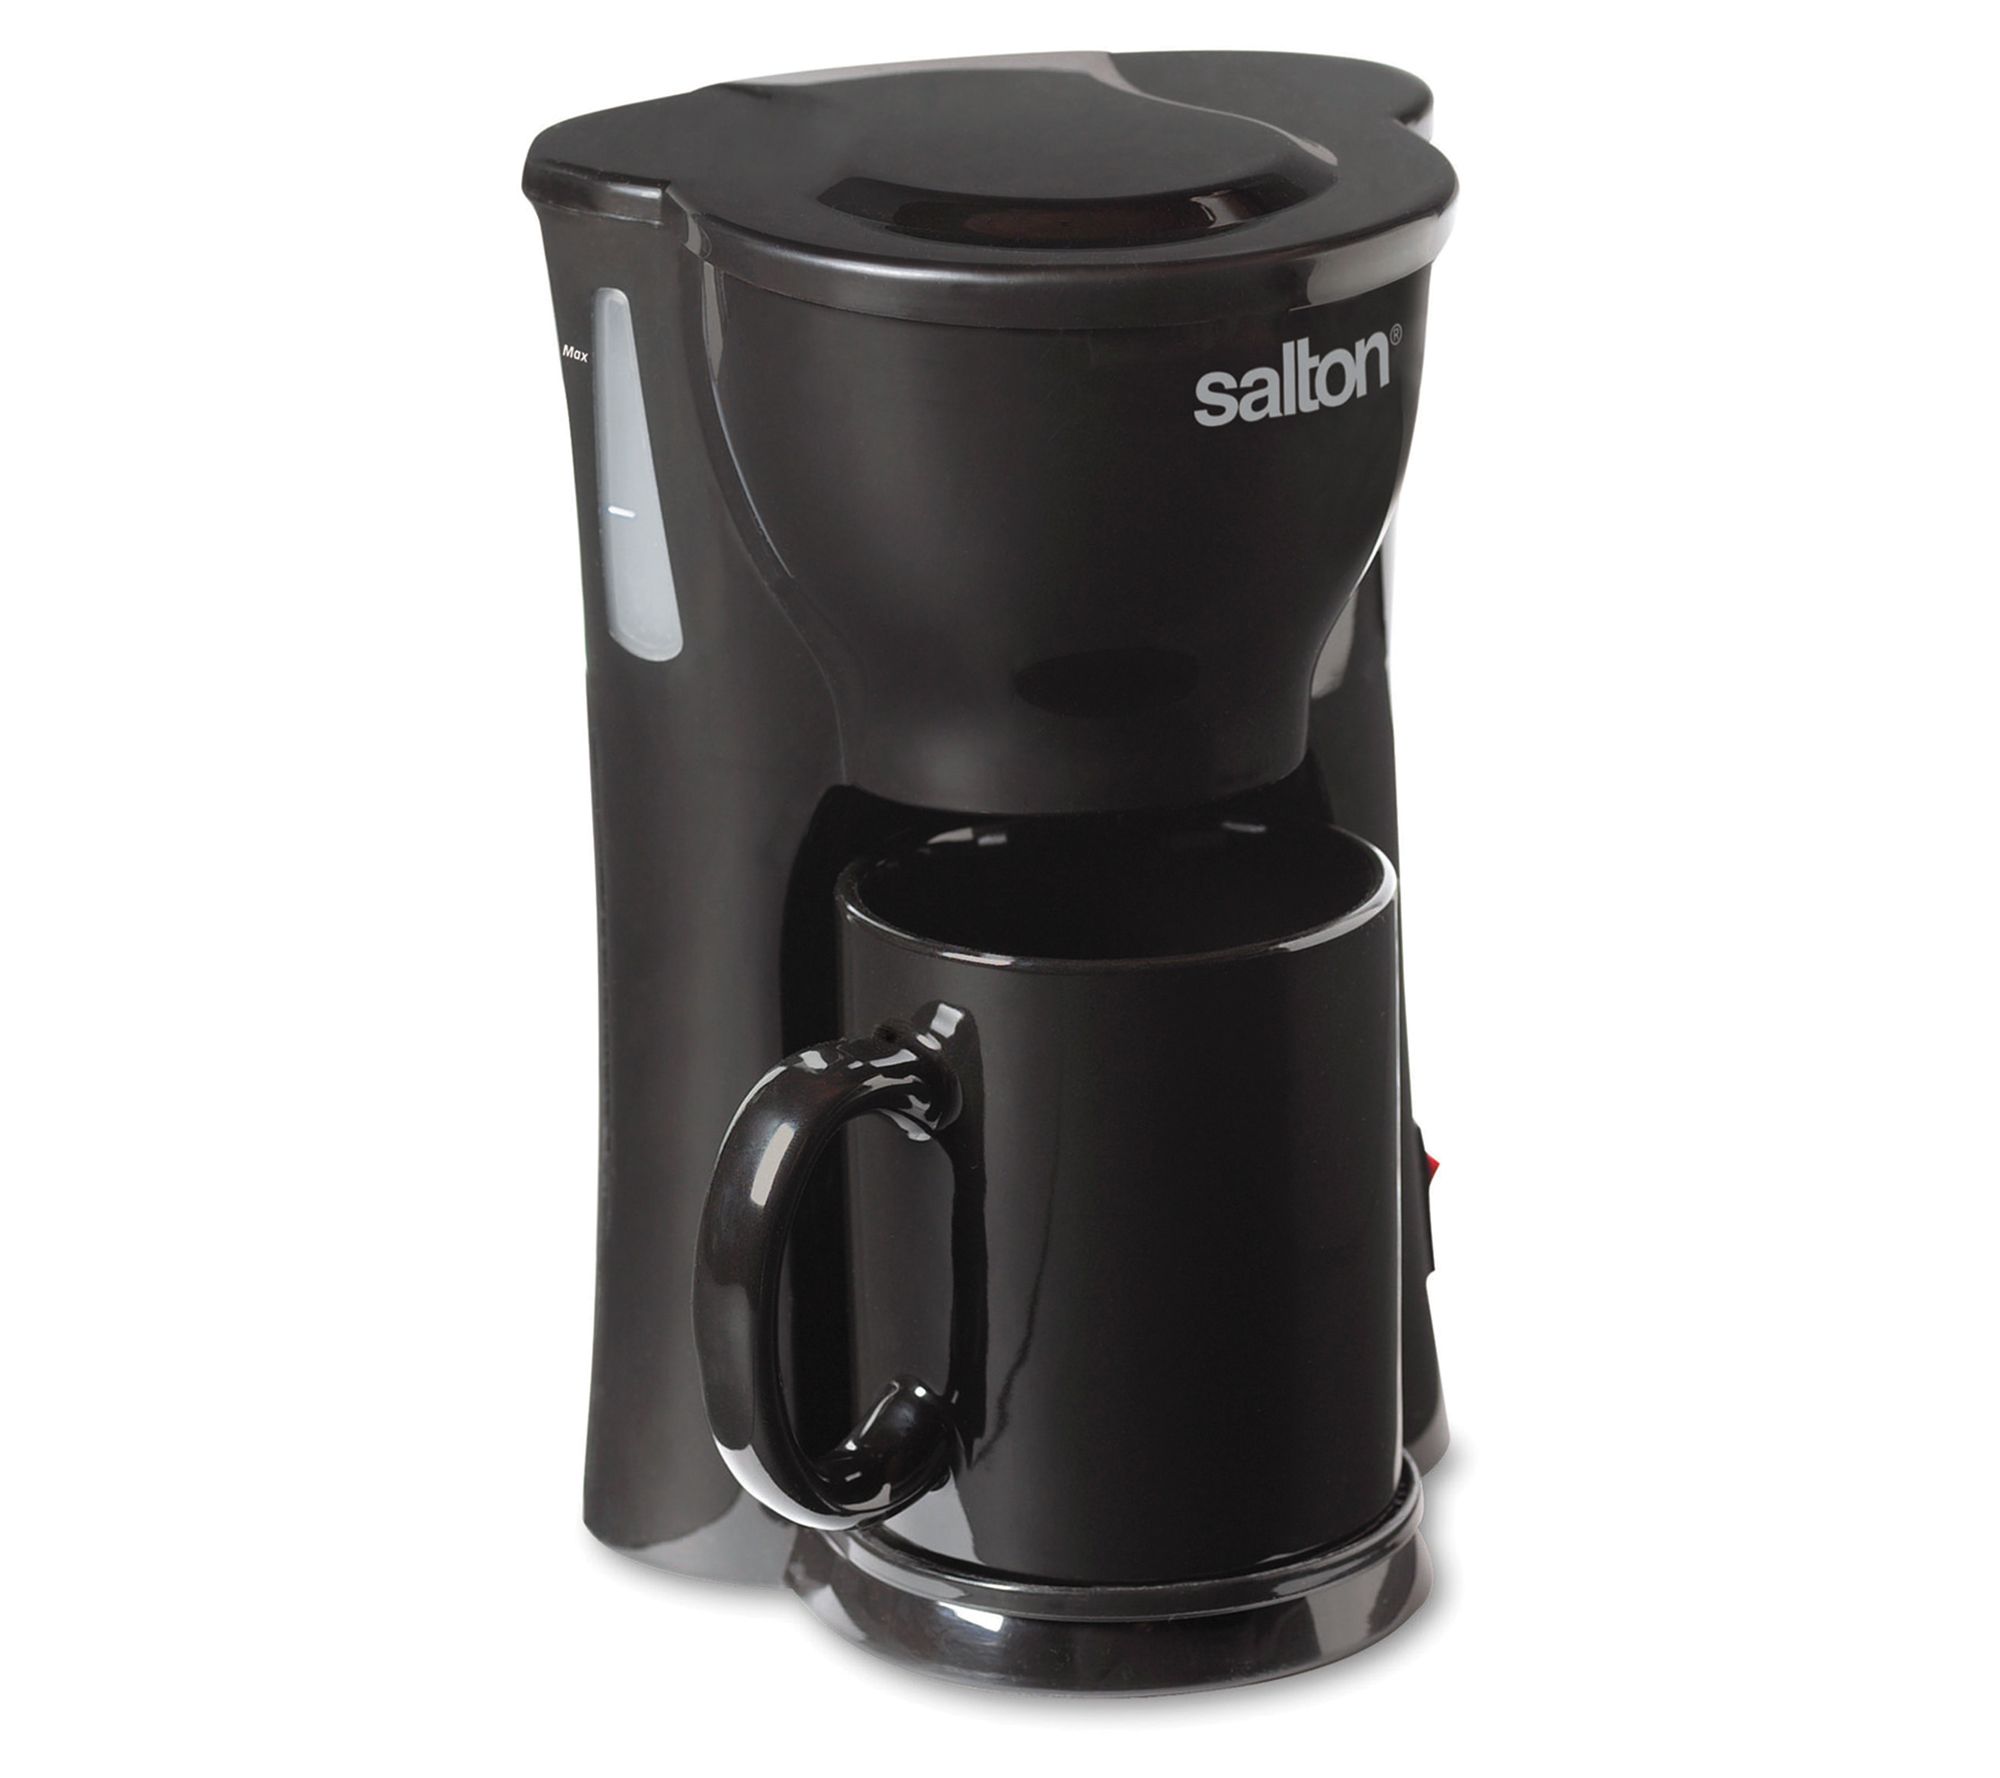 Elite Gourmet Automatic Brew & Drip Coffee Maker, with Pause N Serve,  Reusable